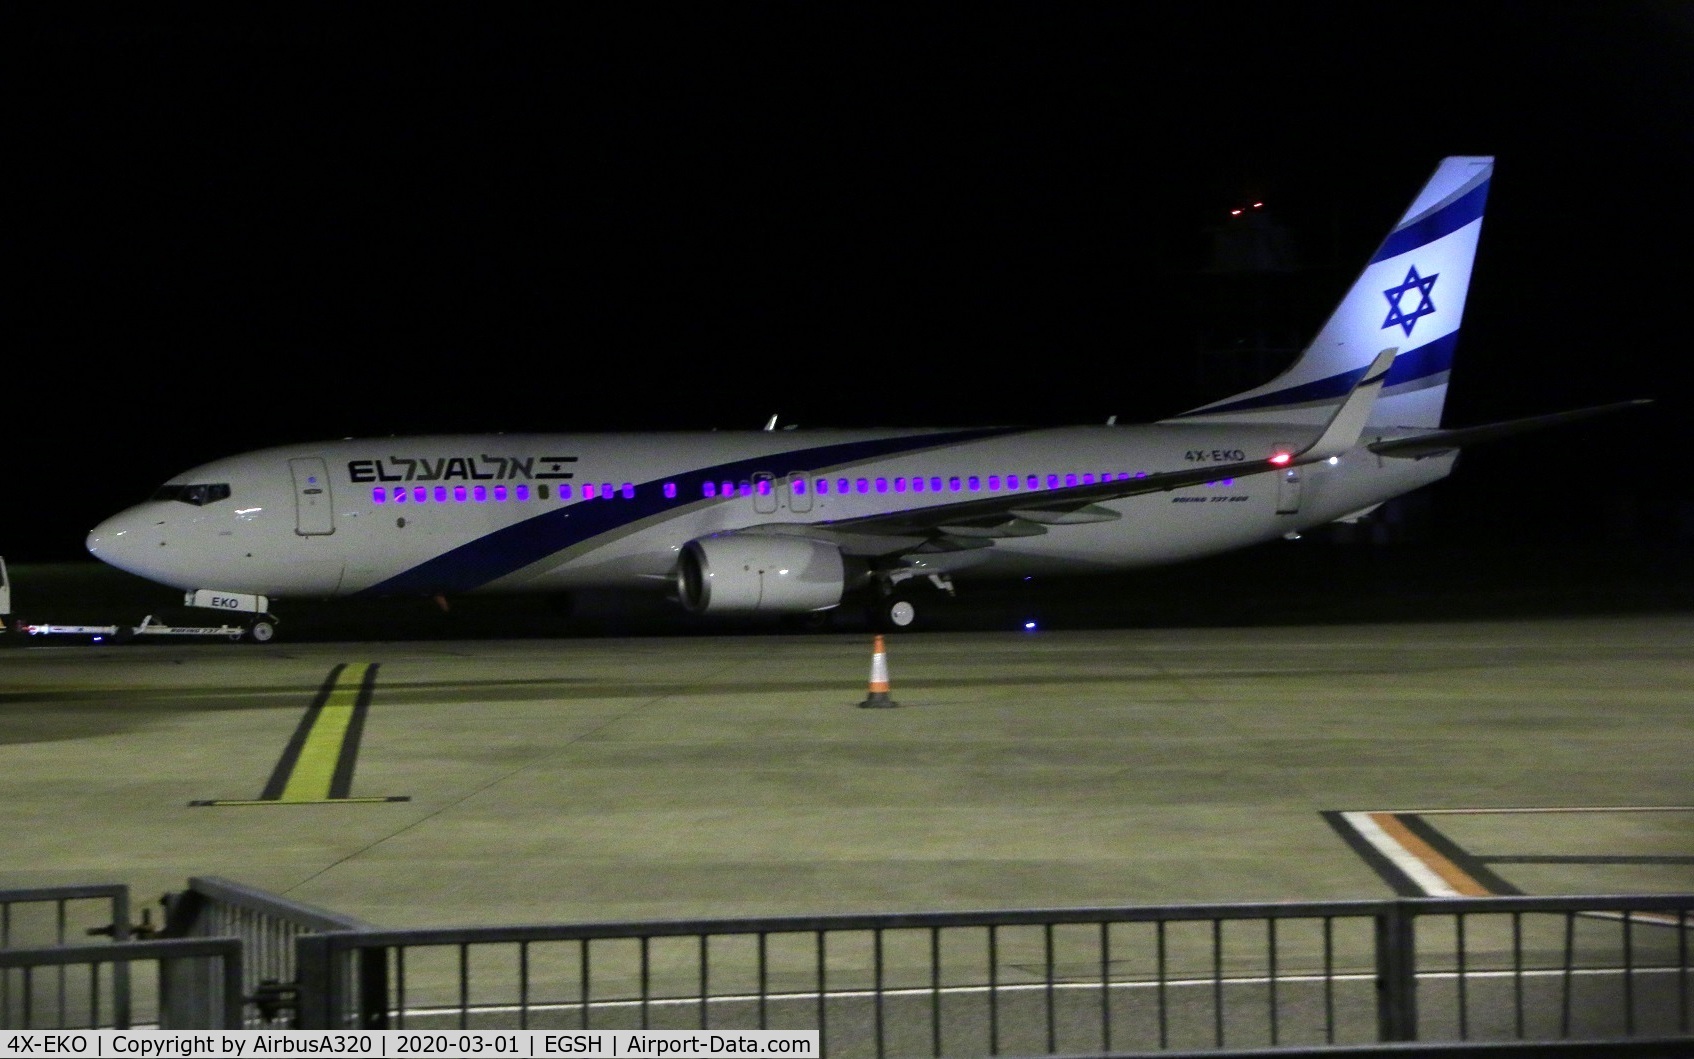 4X-EKO, 2003 Boeing 737-86Q C/N 30287, Emerged from paint  now in standard livery